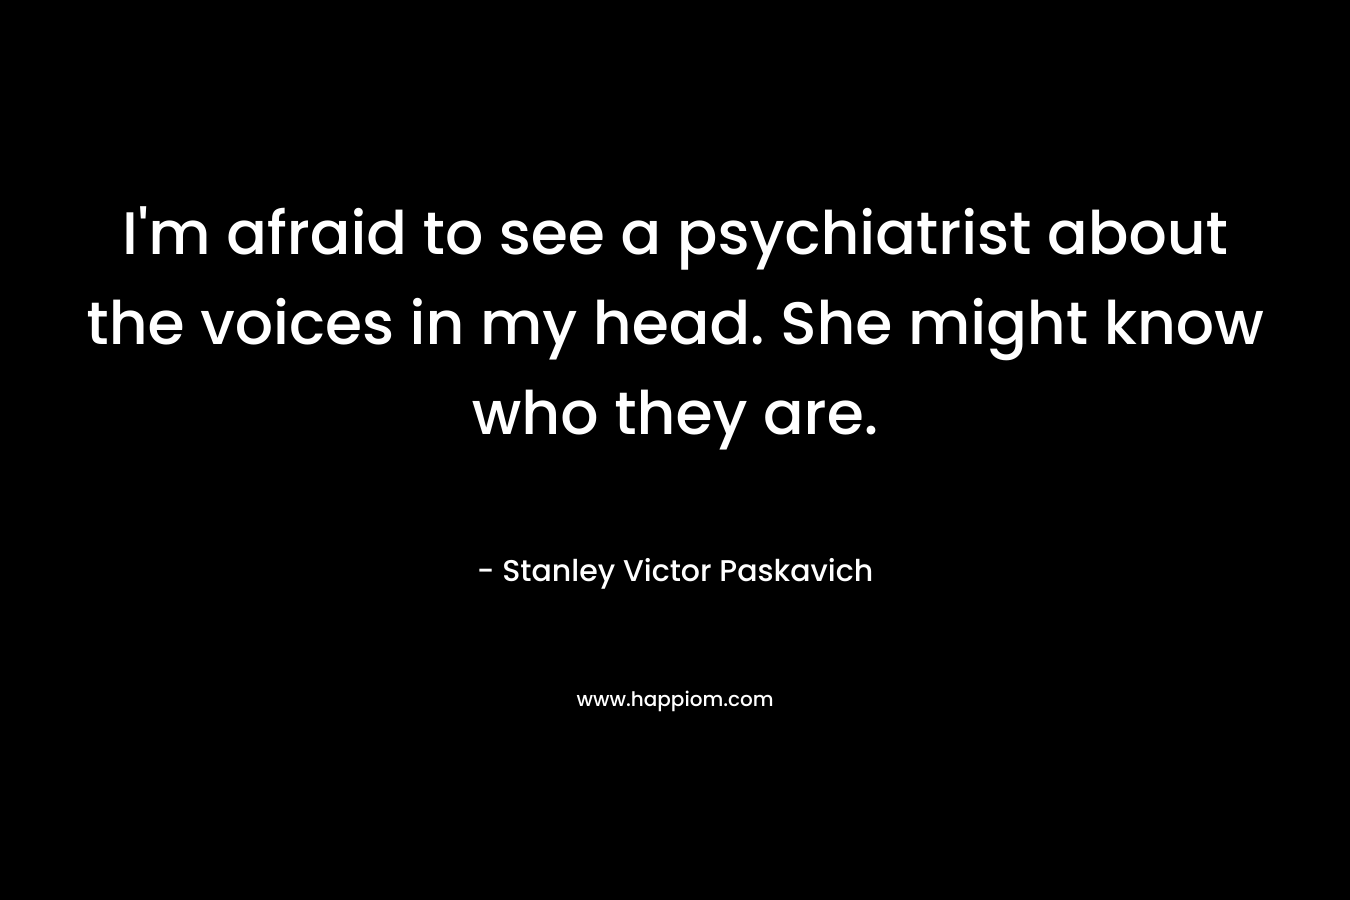 I'm afraid to see a psychiatrist about the voices in my head. She might know who they are.